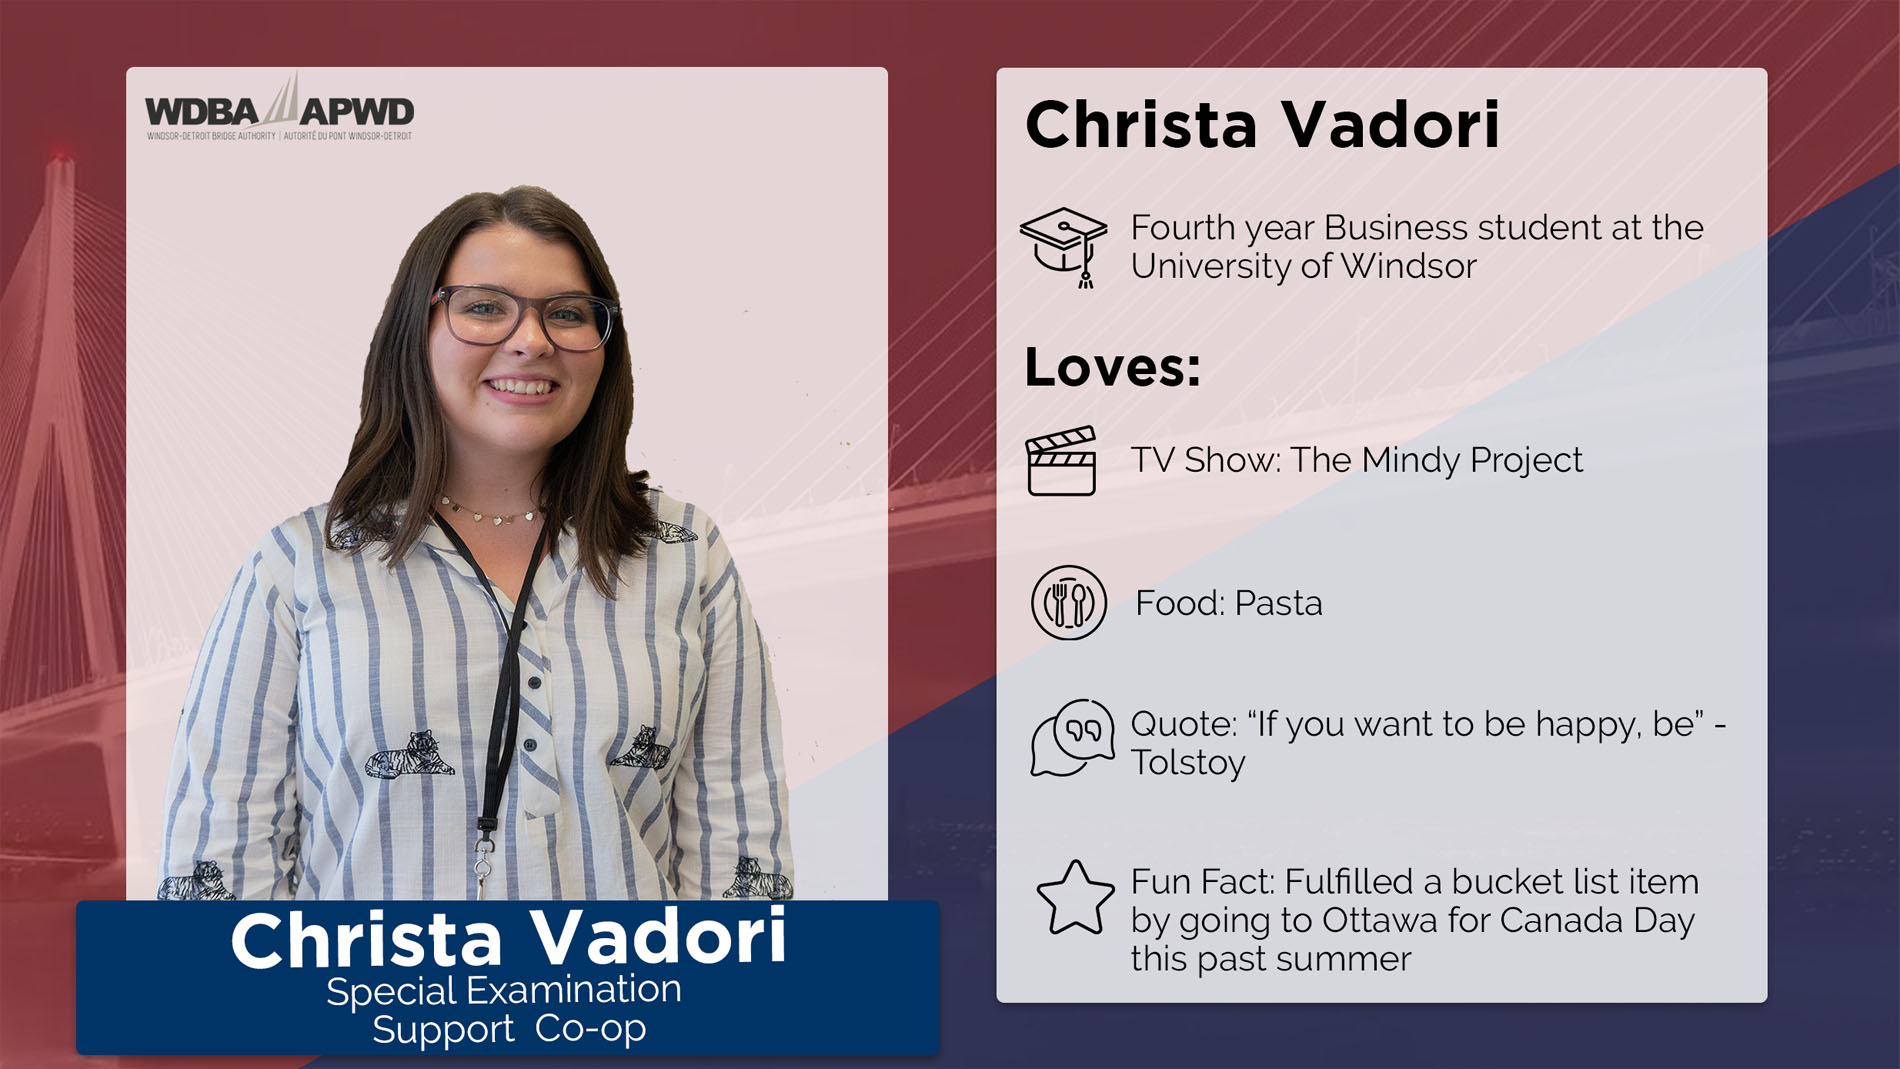 Christa Vadori, Special Examination Co-Op. Fourth year Business student at the University of Windsor. Loves: TV Show: The Mindy Project. Food: Pasta Quote: "If you want to be happy, be" - Tolstoy. Fun Fact: Fulfilled a bucket list item by going to Ottawa for Canada Day this past summer. 